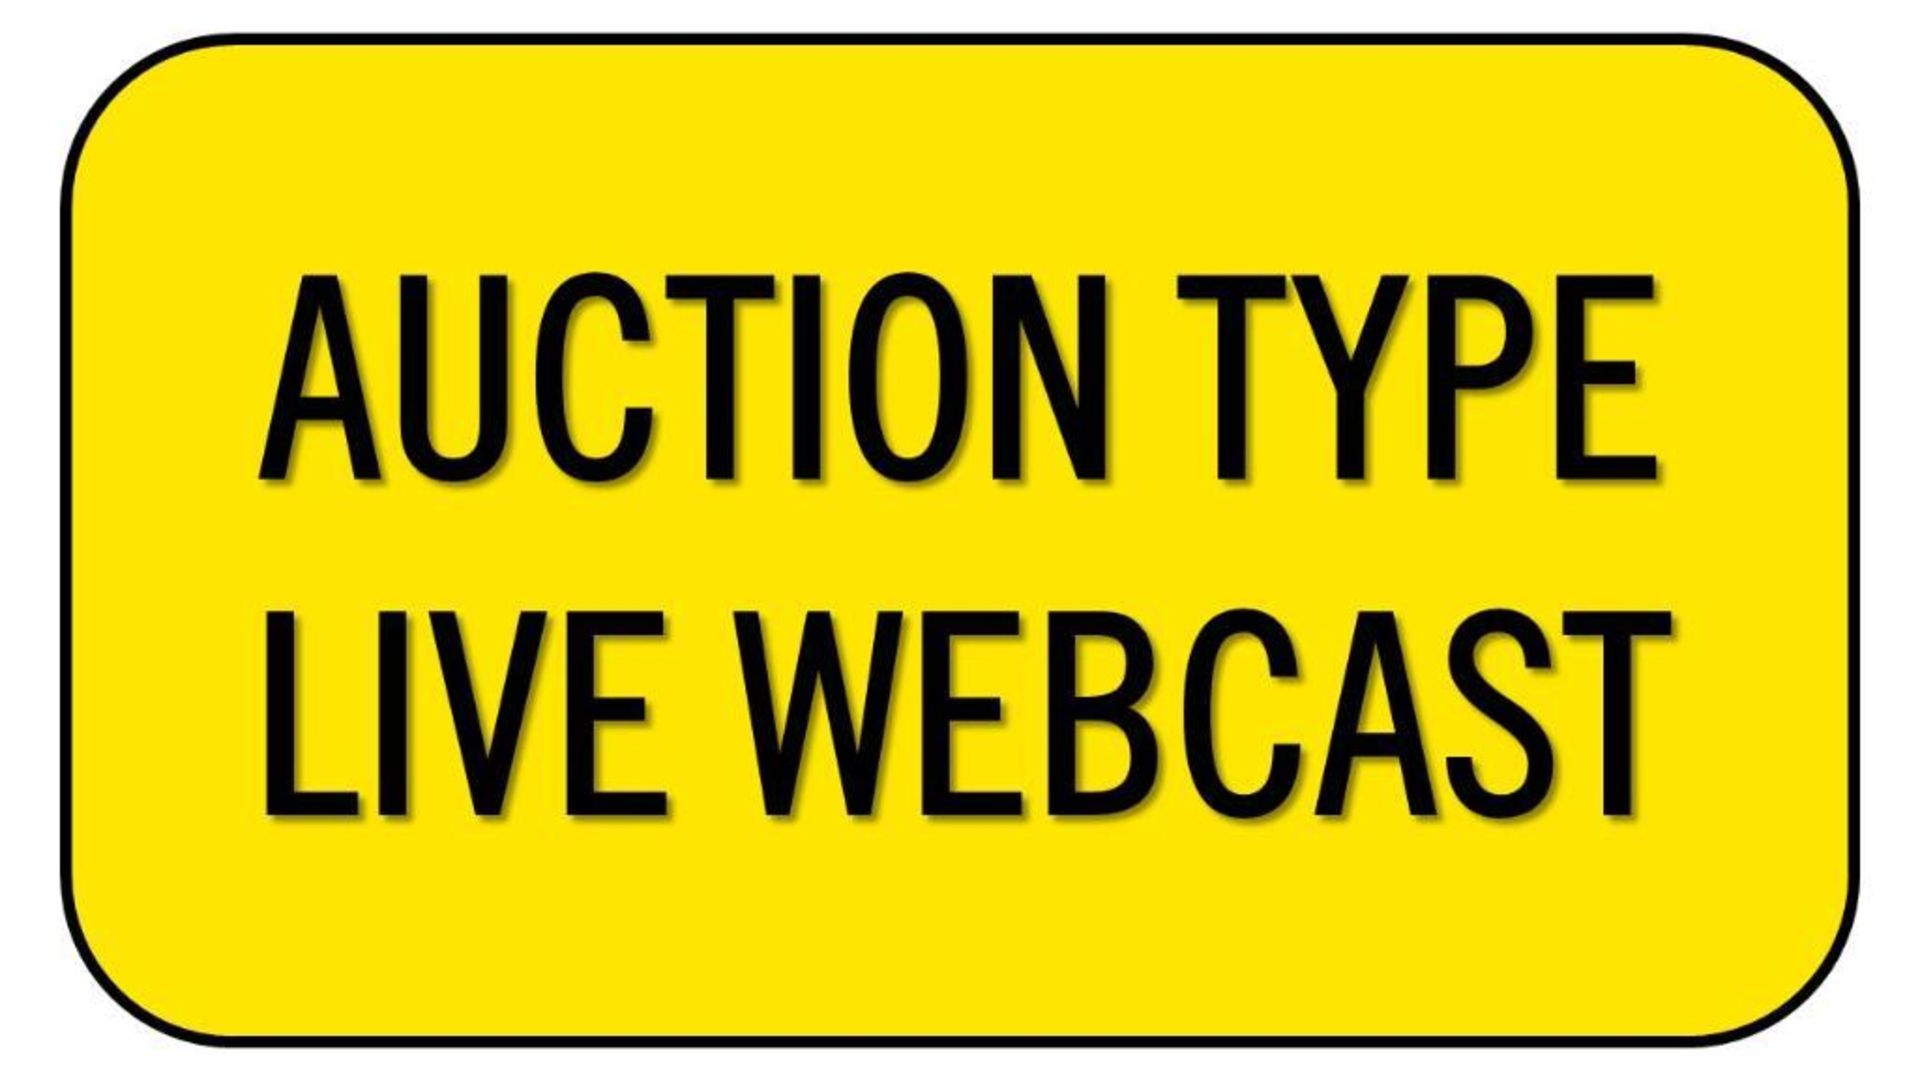 This is a live webcast auction (not a timed online auction). The live webcast auction will begin at